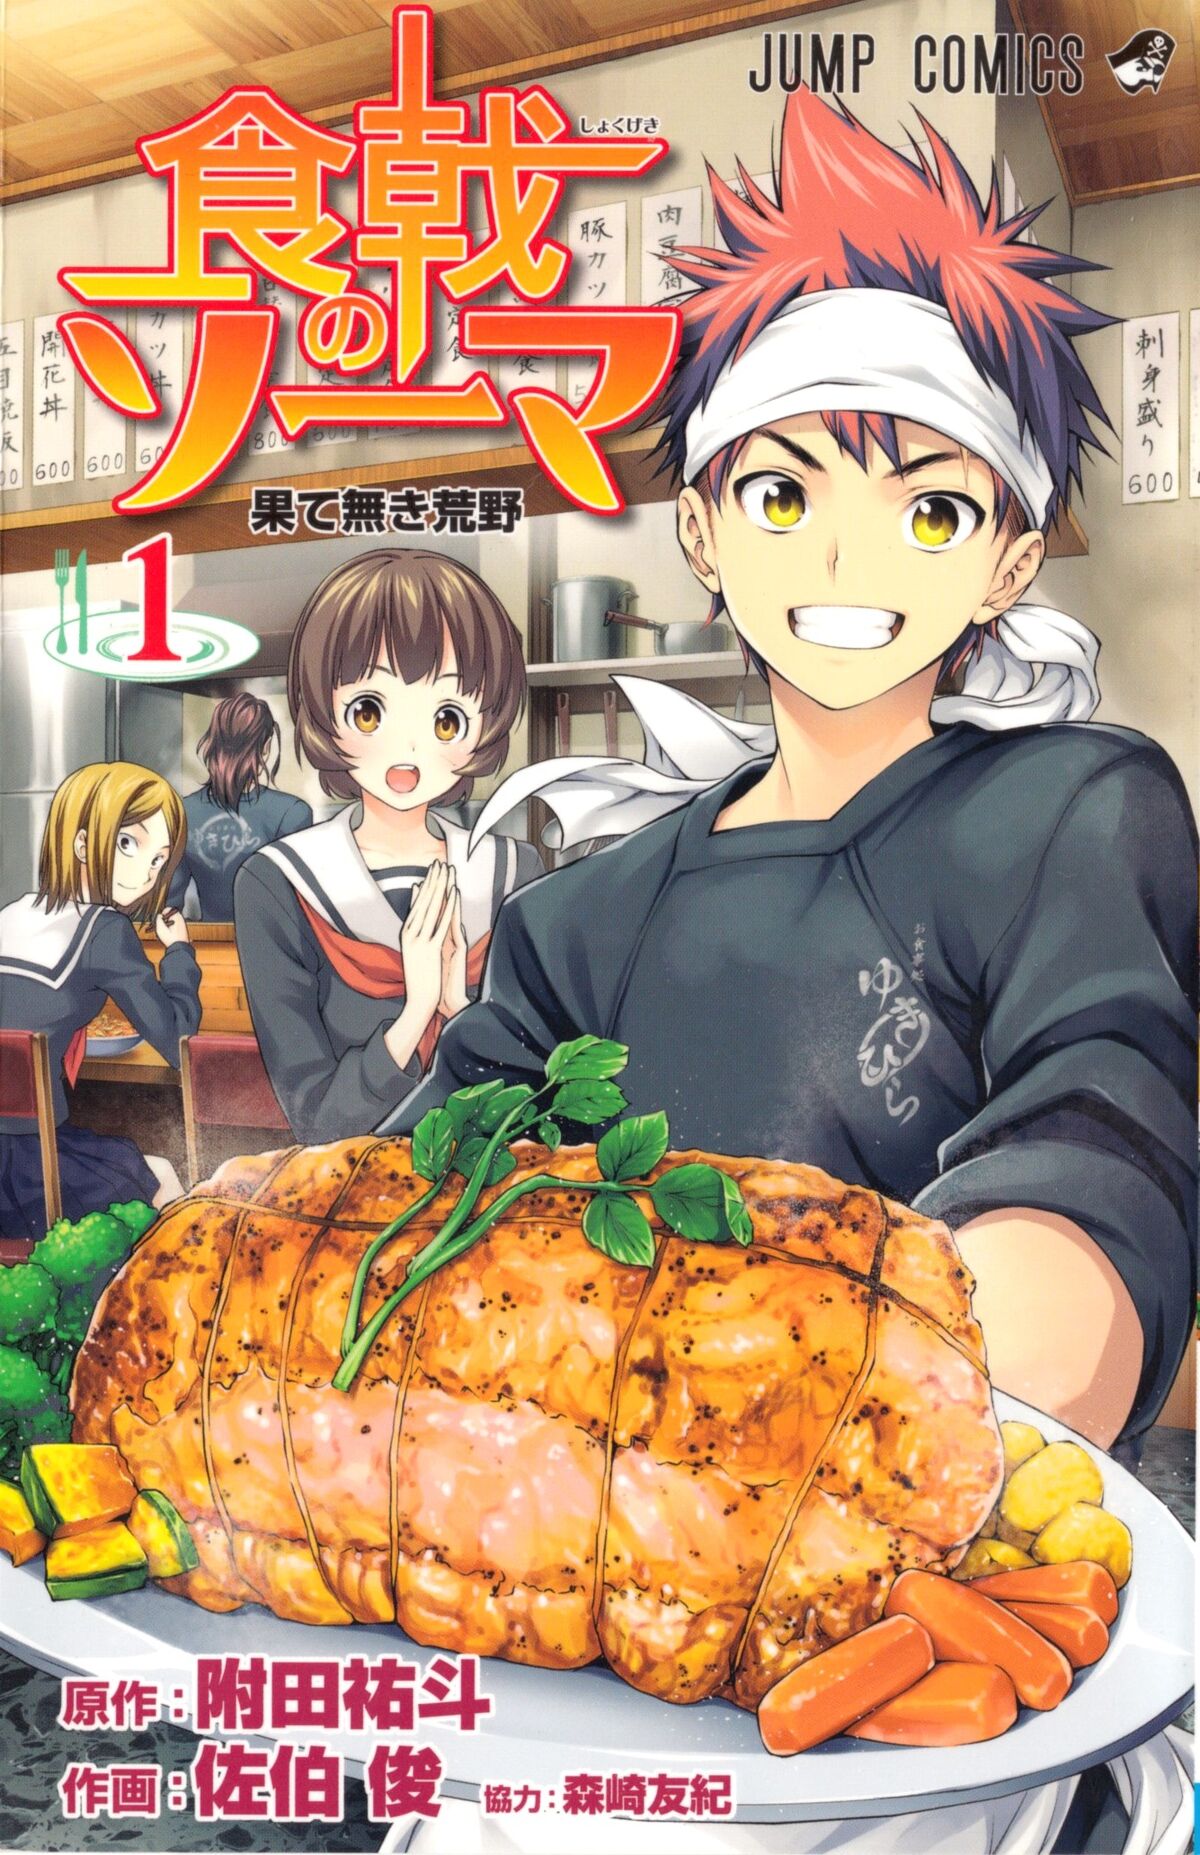 Shokugeki no Soma: Come for the Foodgasms, Stay for the Rebellion – The  Geekiary